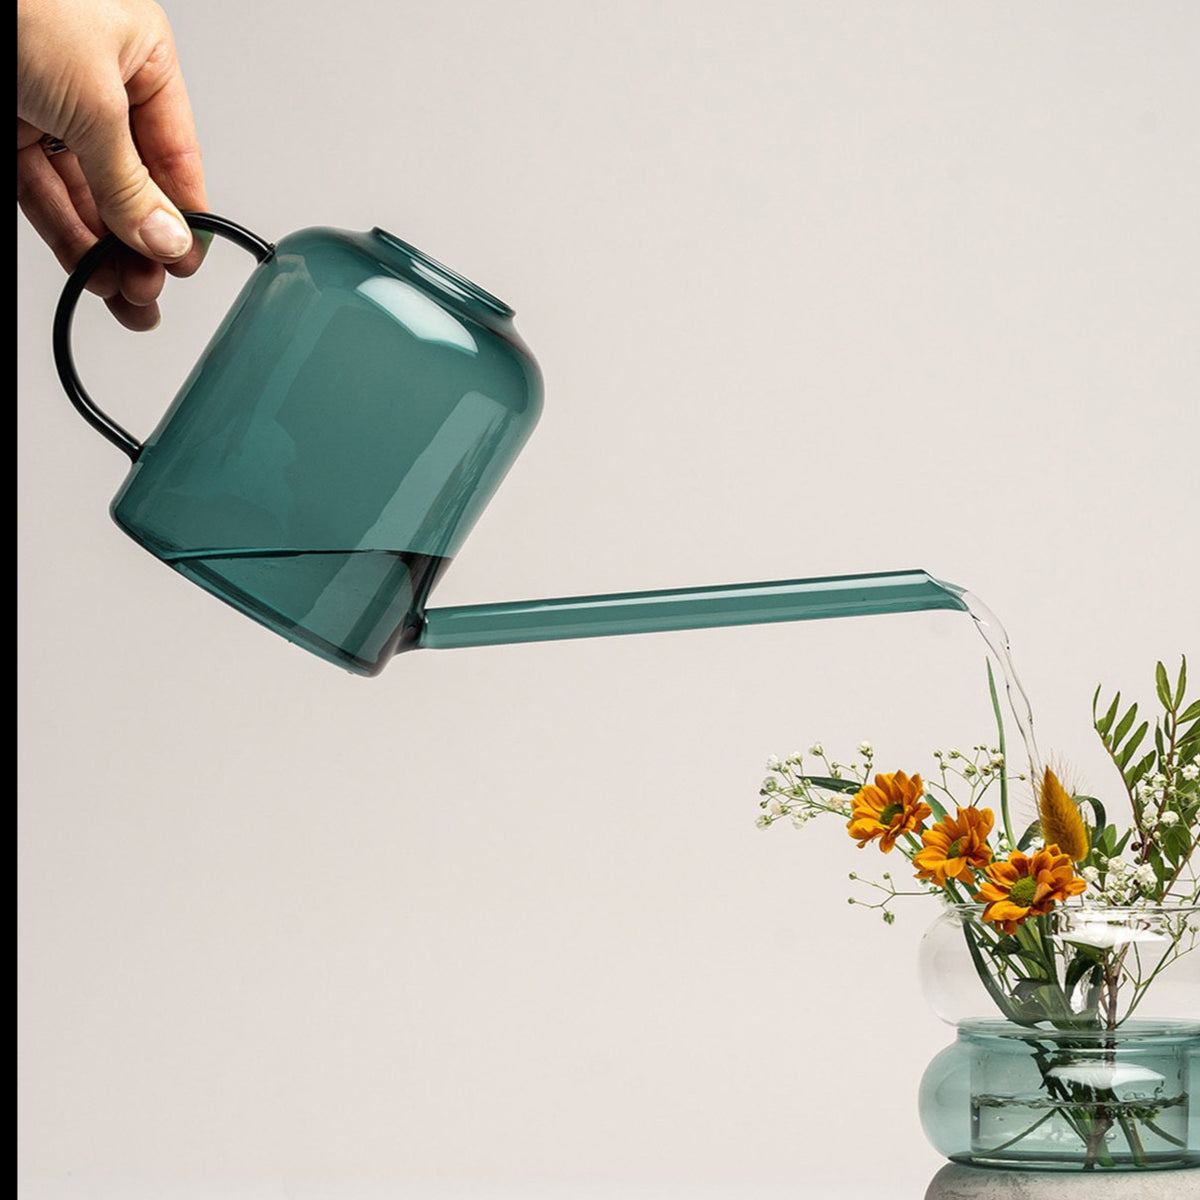 Water being poured from a Muurla Design Watering Can made in Borosilicate Glass. Teal Colourway 